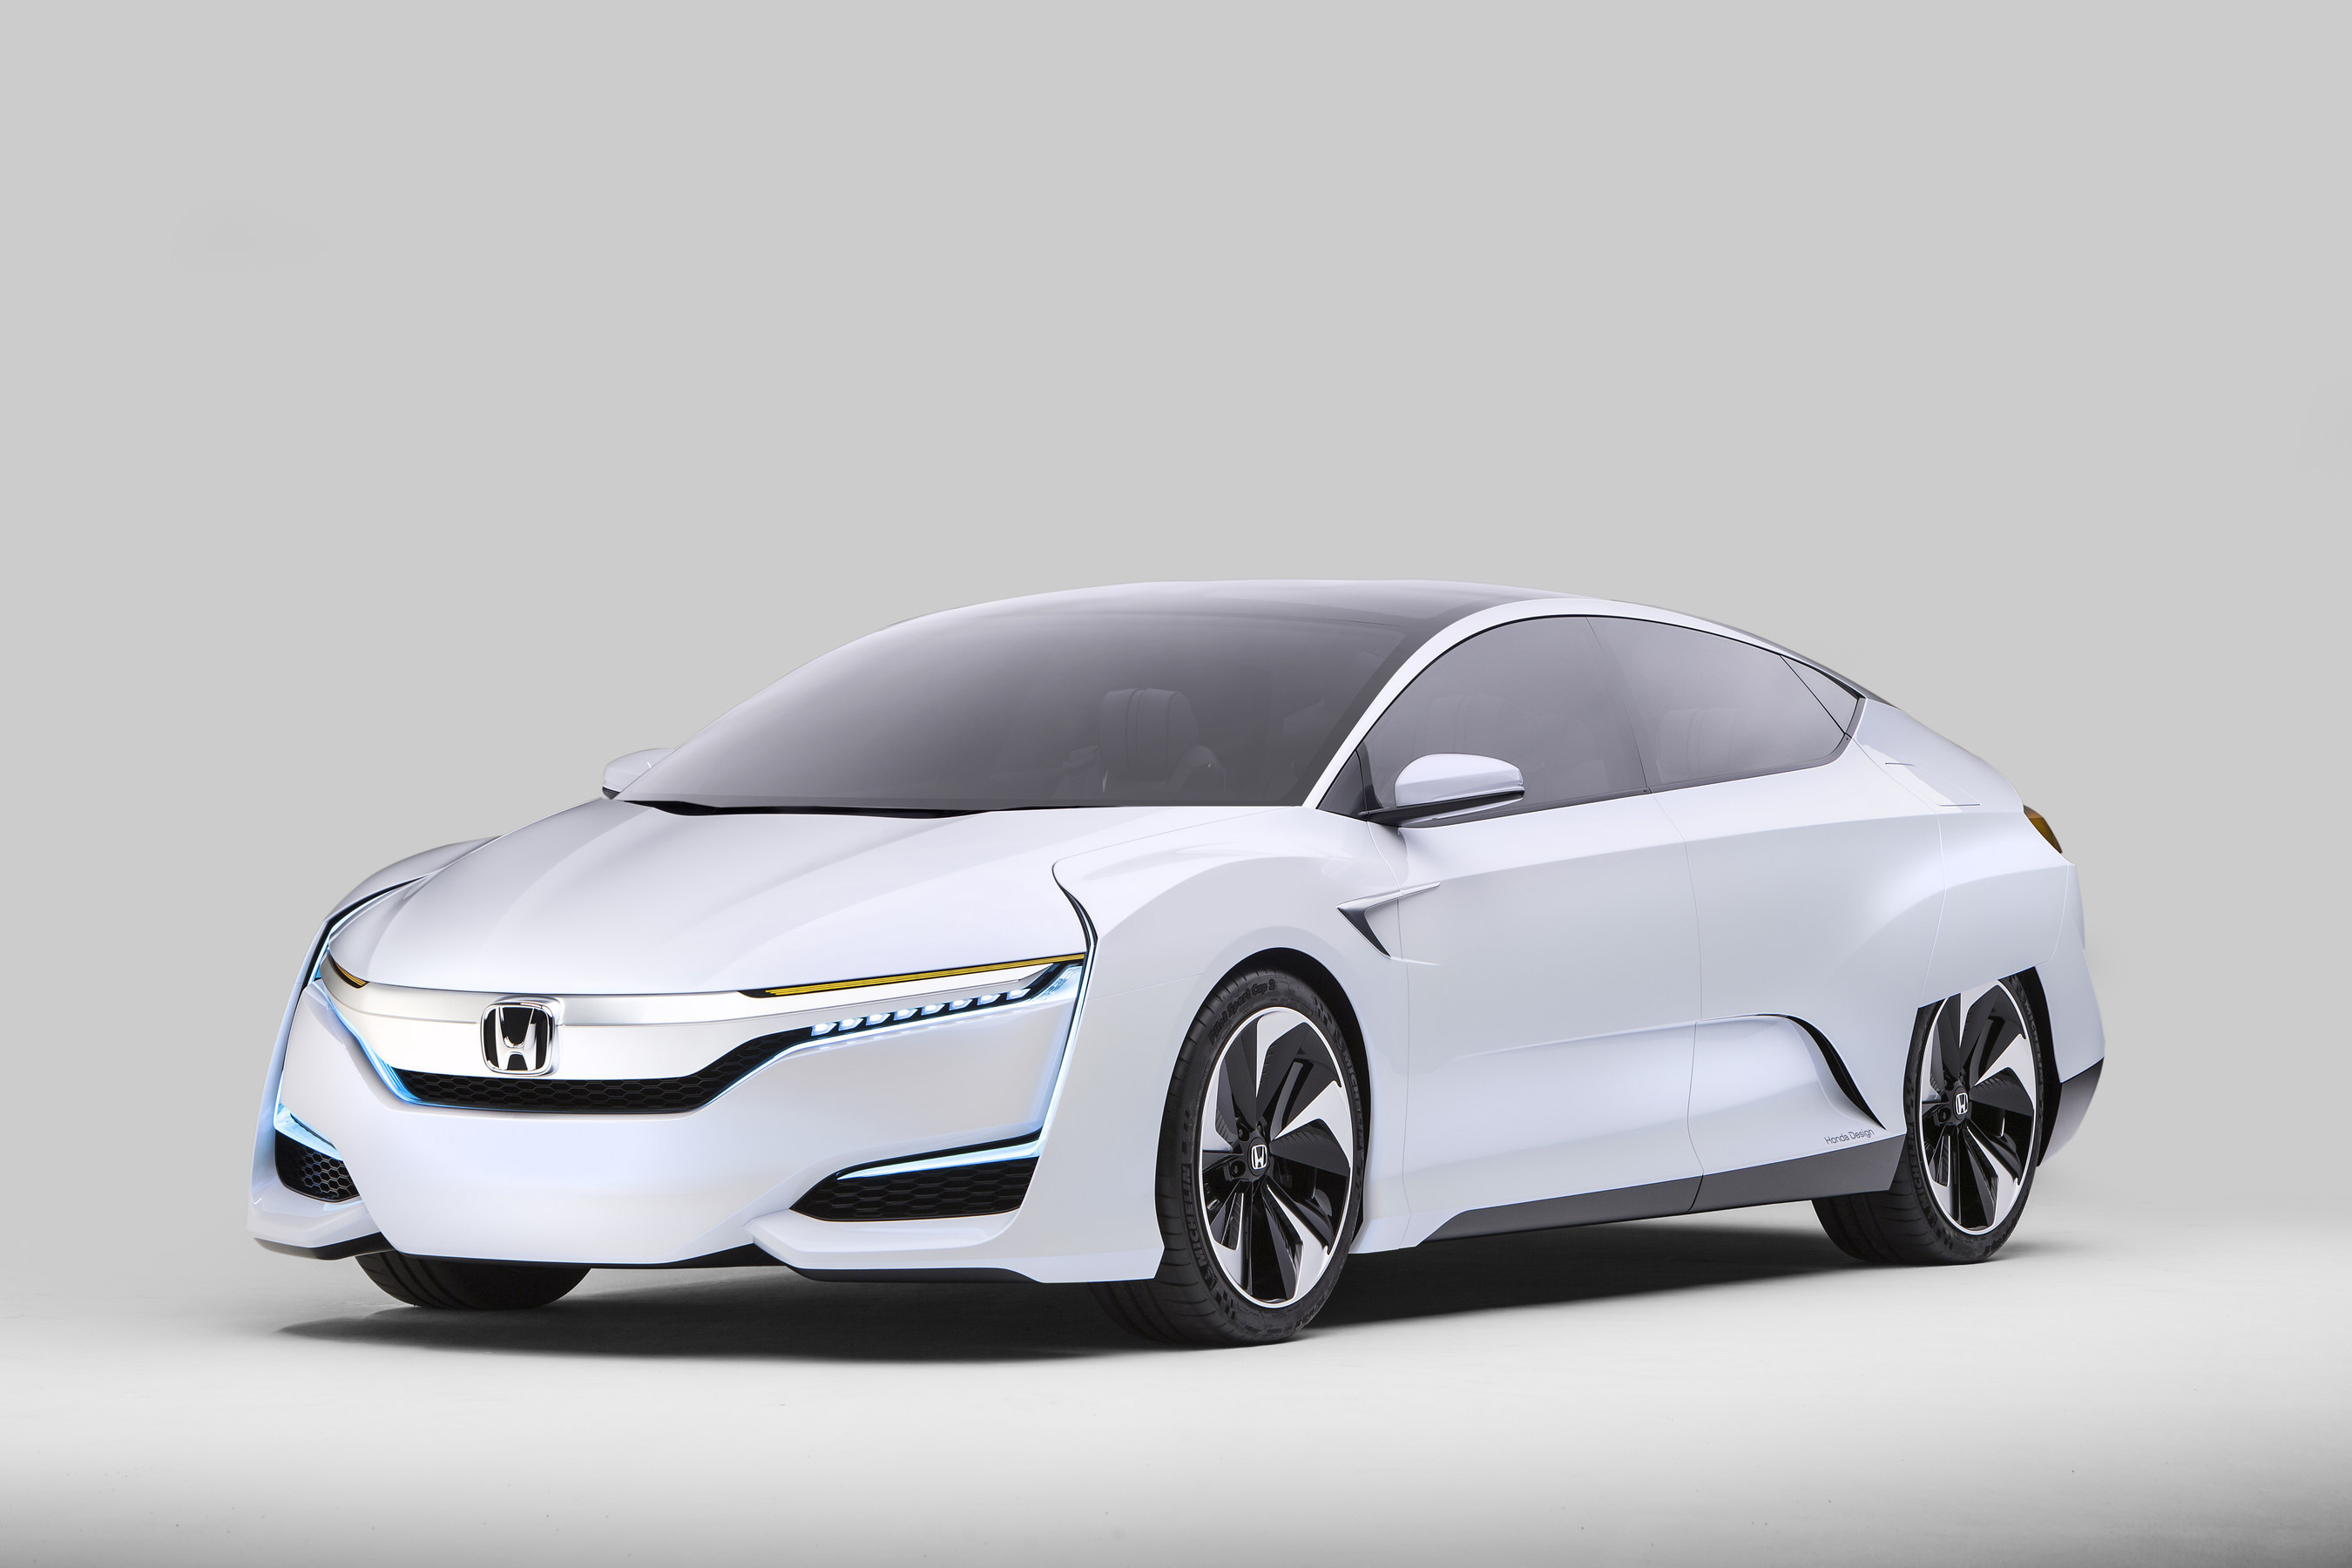 Honda to Launch Next Generation Advanced Powertrain Vehicles by 2018, Honda FCV Concept Makes North American Debut